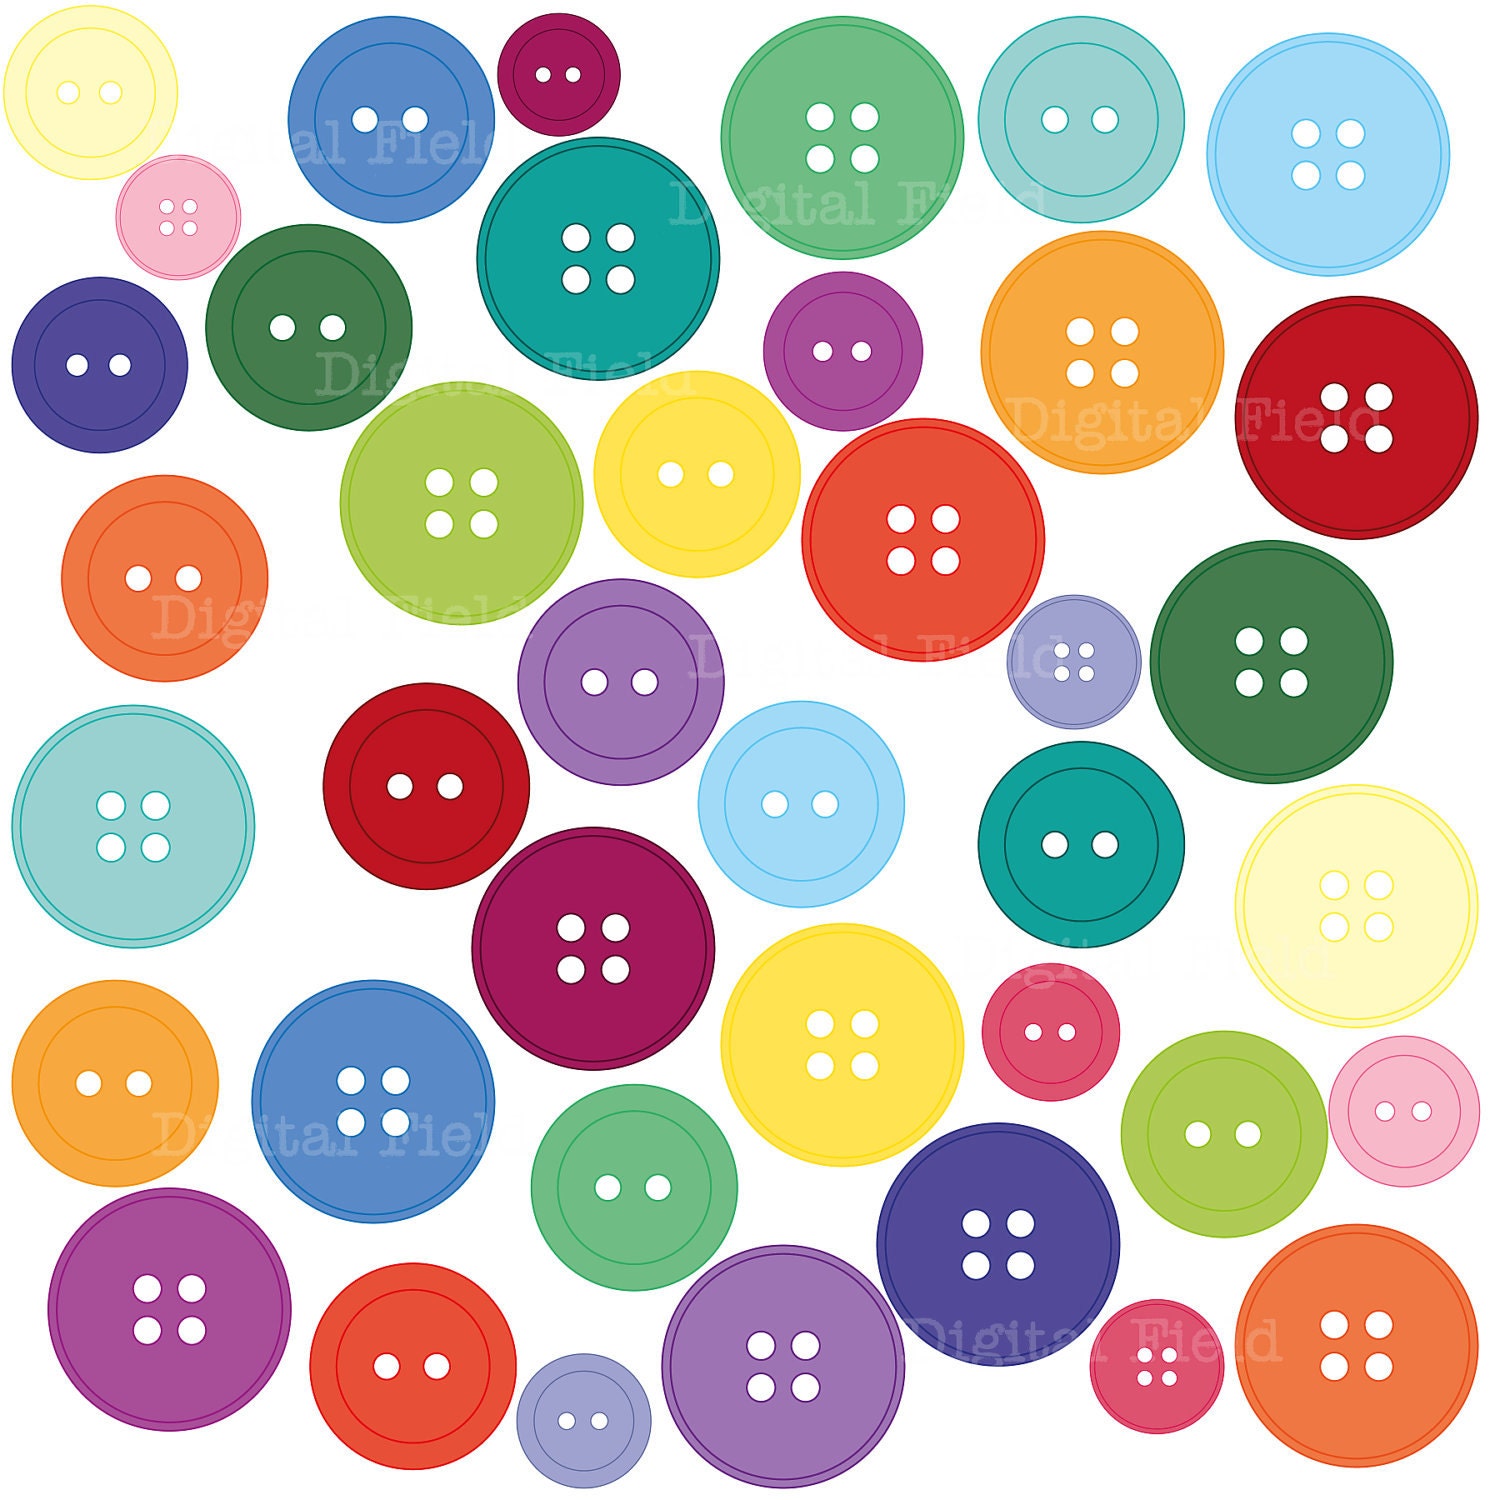 free clip art icons buttons - photo #31